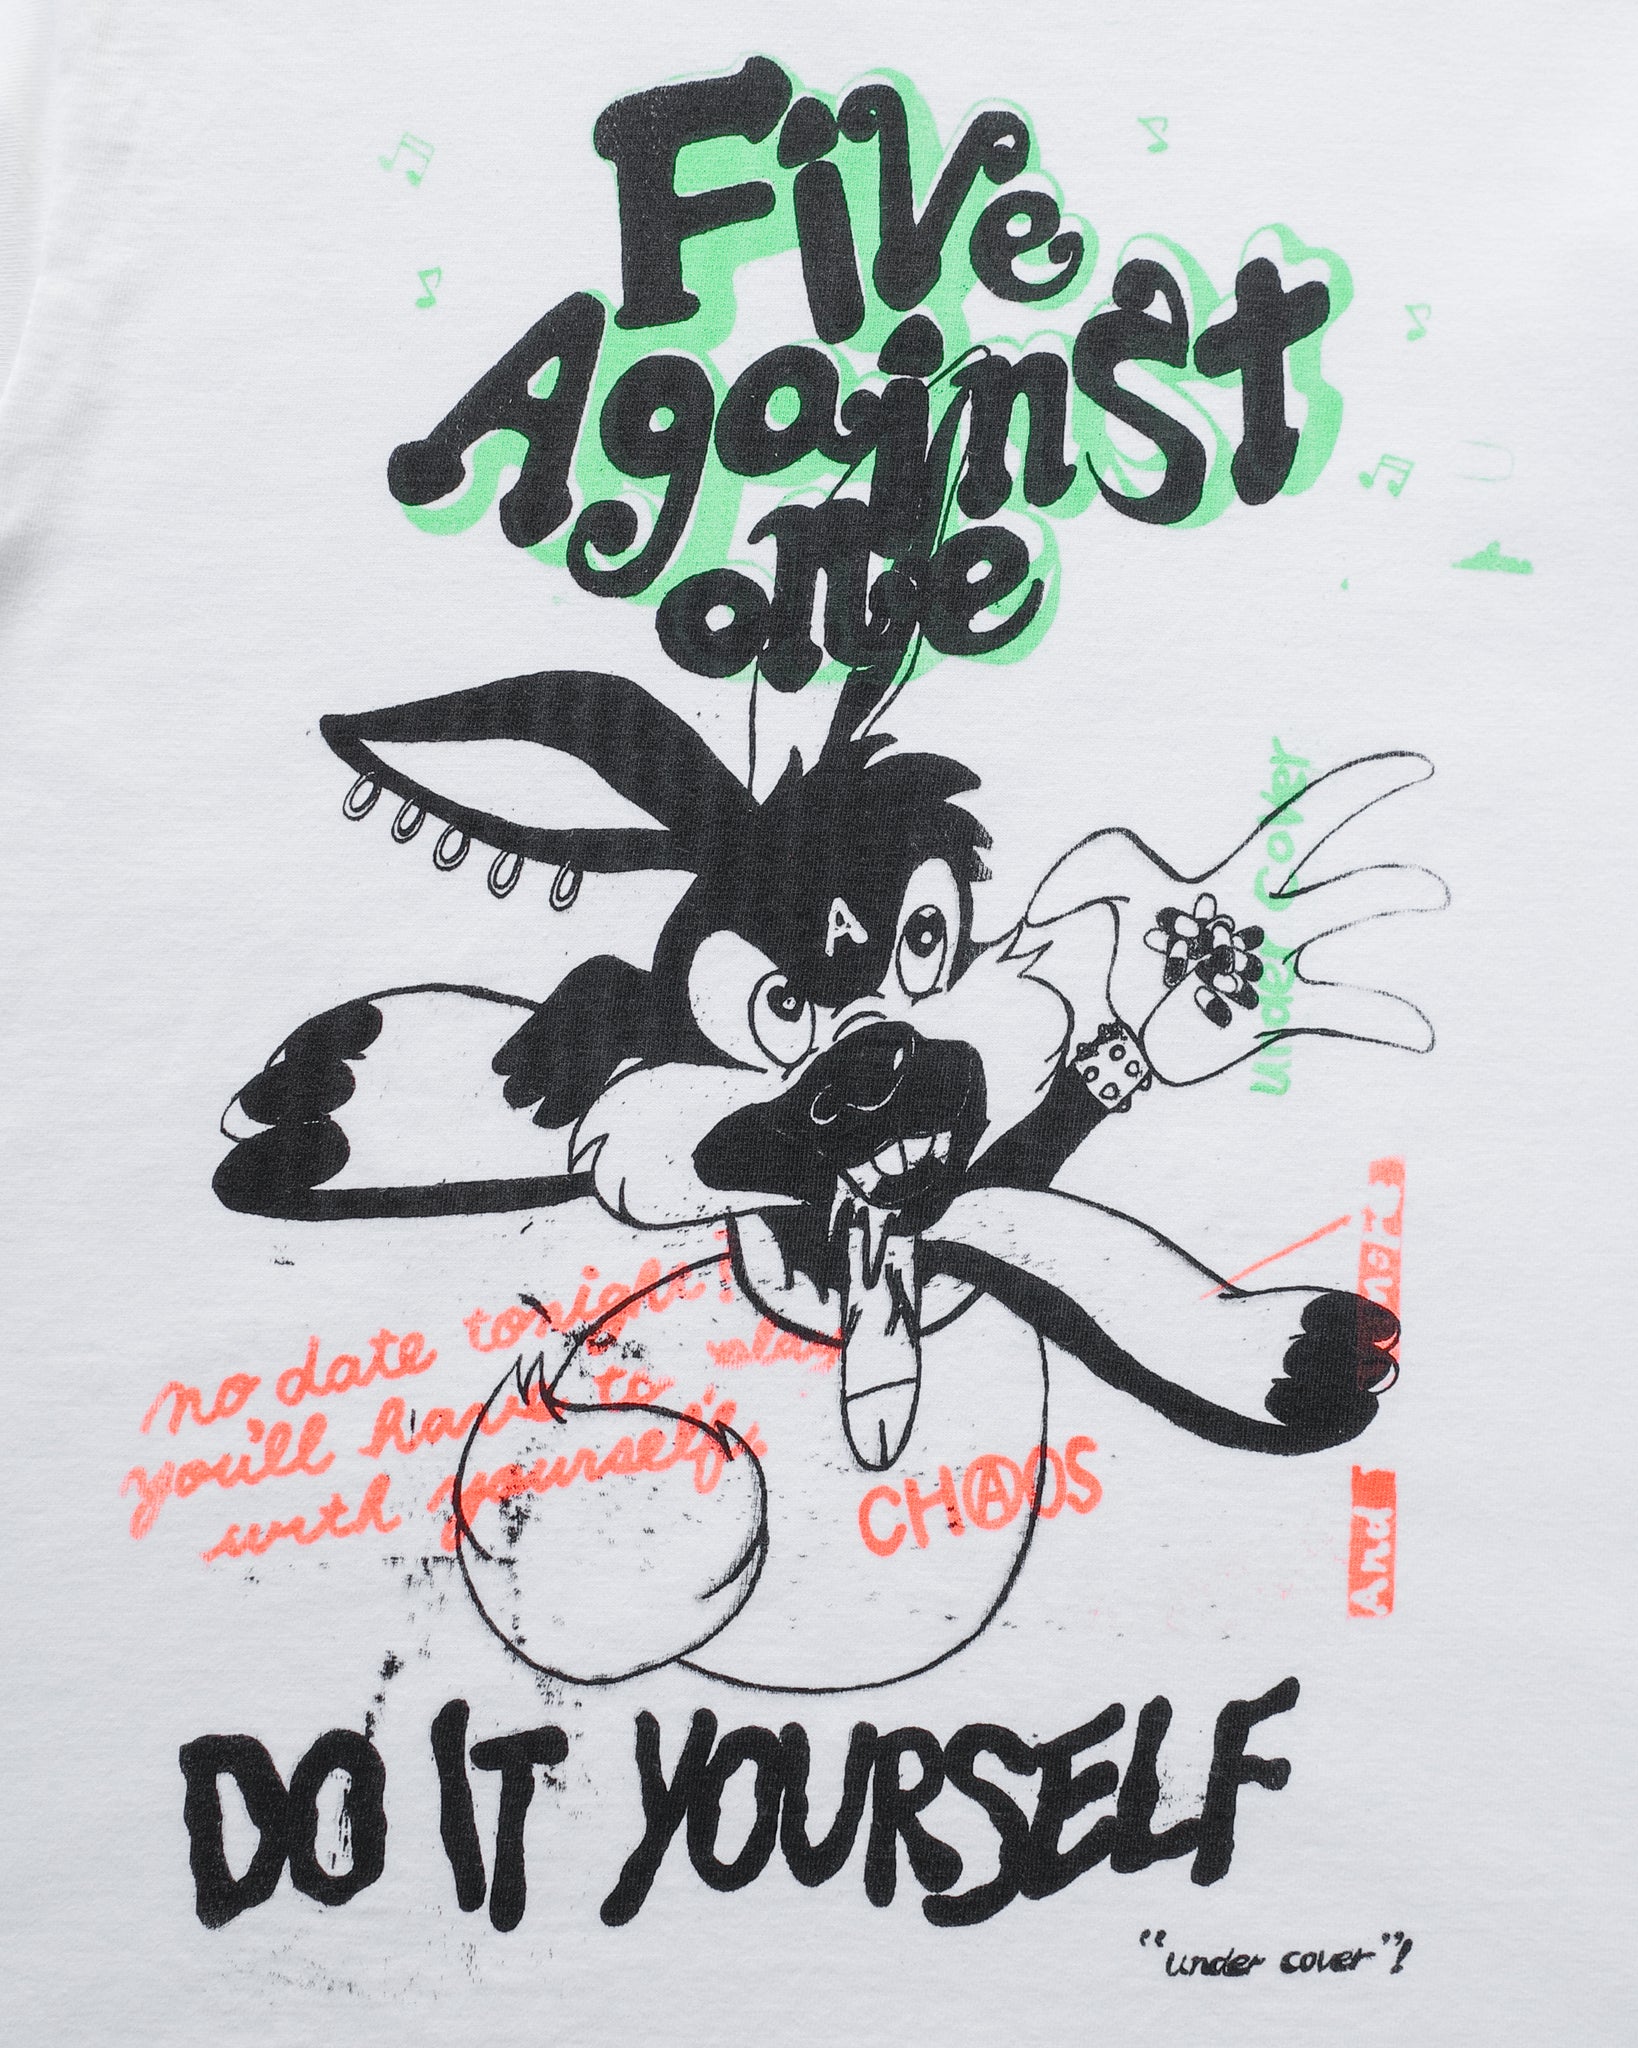 Undercover x Vandalize SS06 "do it yourself" Tee